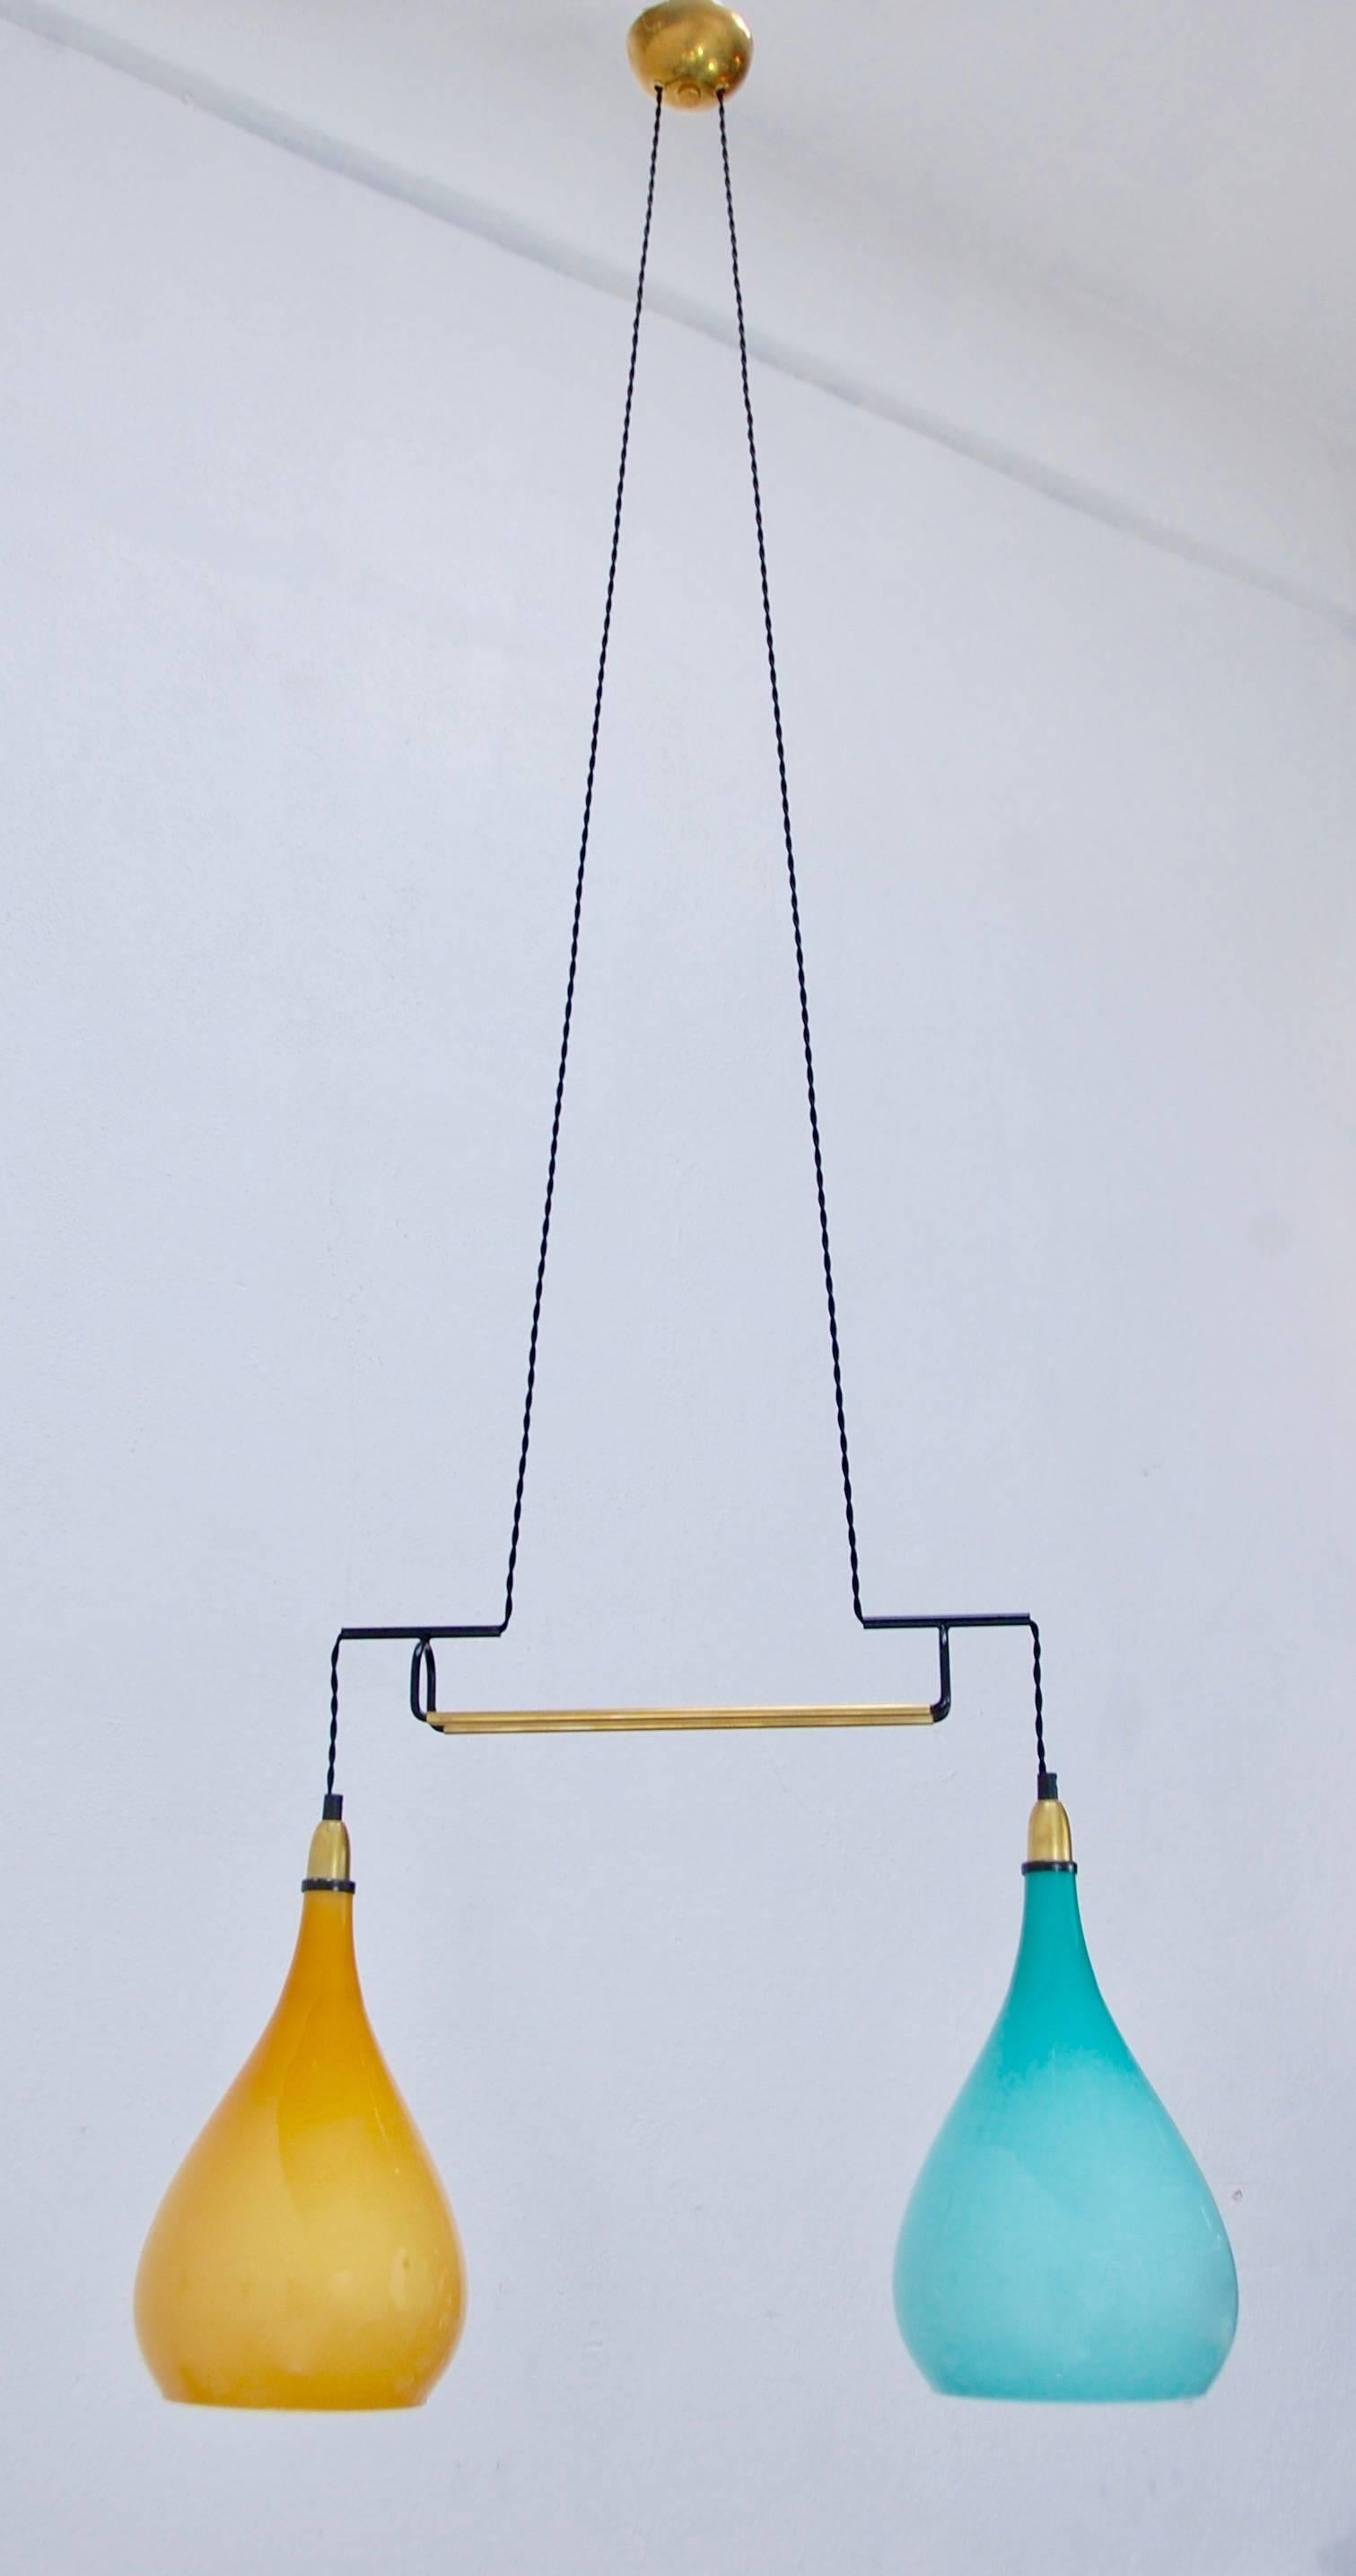 Of the period beautiful Italian 1950s double colored glass Italian pendant. Fully restored, single E26 medium based socket in each glass shade, wired for the US. Overall drop adjustable upon request to a certain degree.
We at Lumfardo Luminaires do